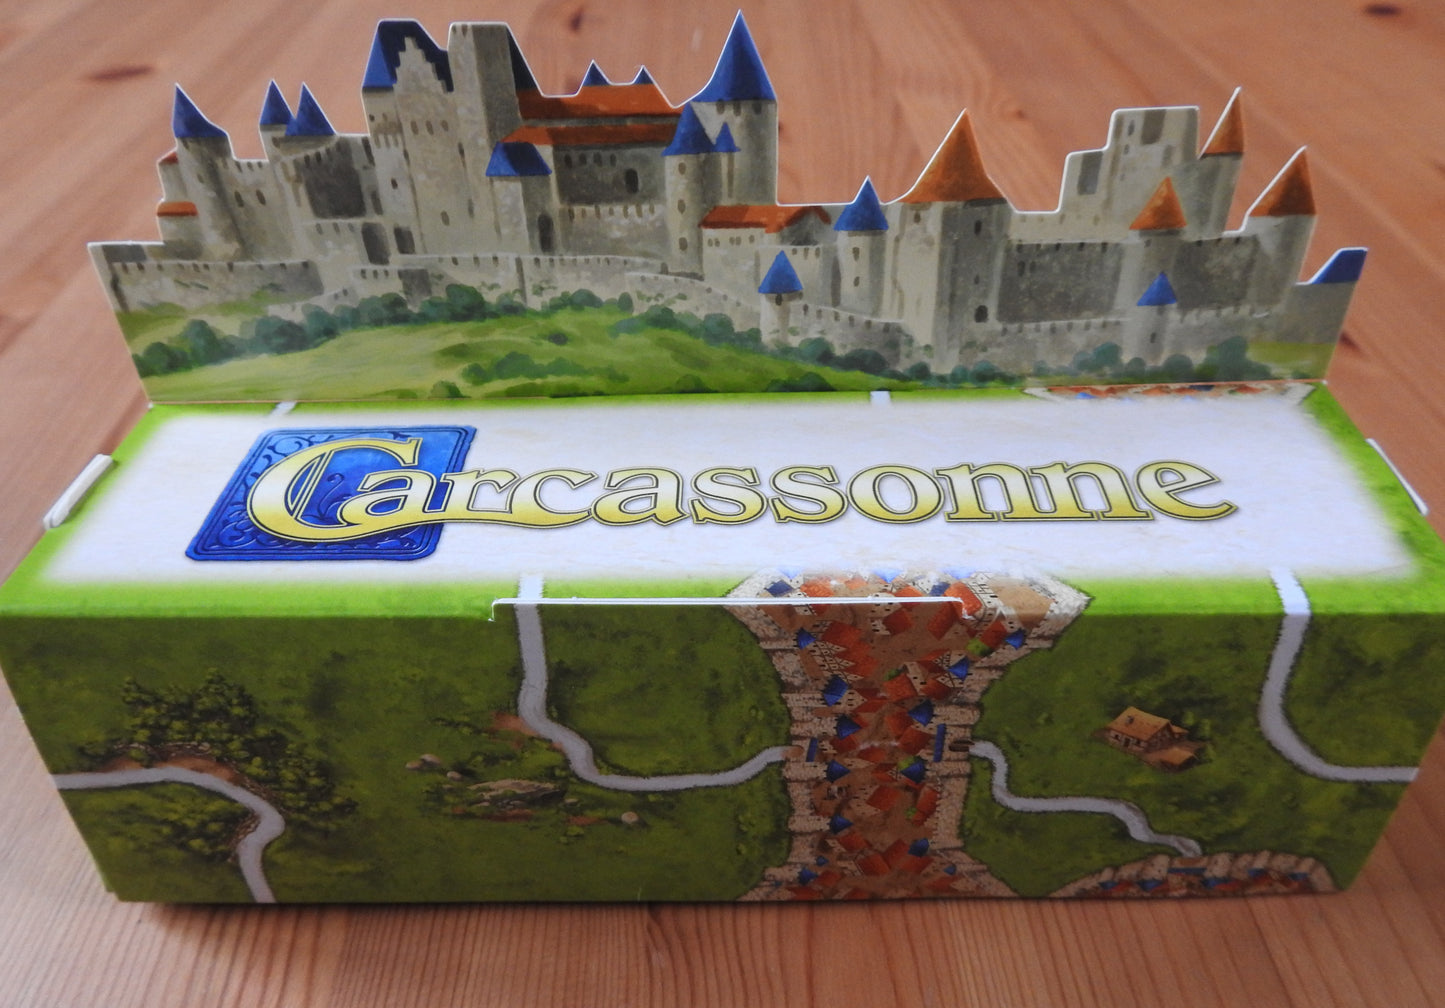 View of the 3D starting box with castles panorama cutout as part of this 3D Starting Landscape mini expansion and accessory for the Carcassonne board game.